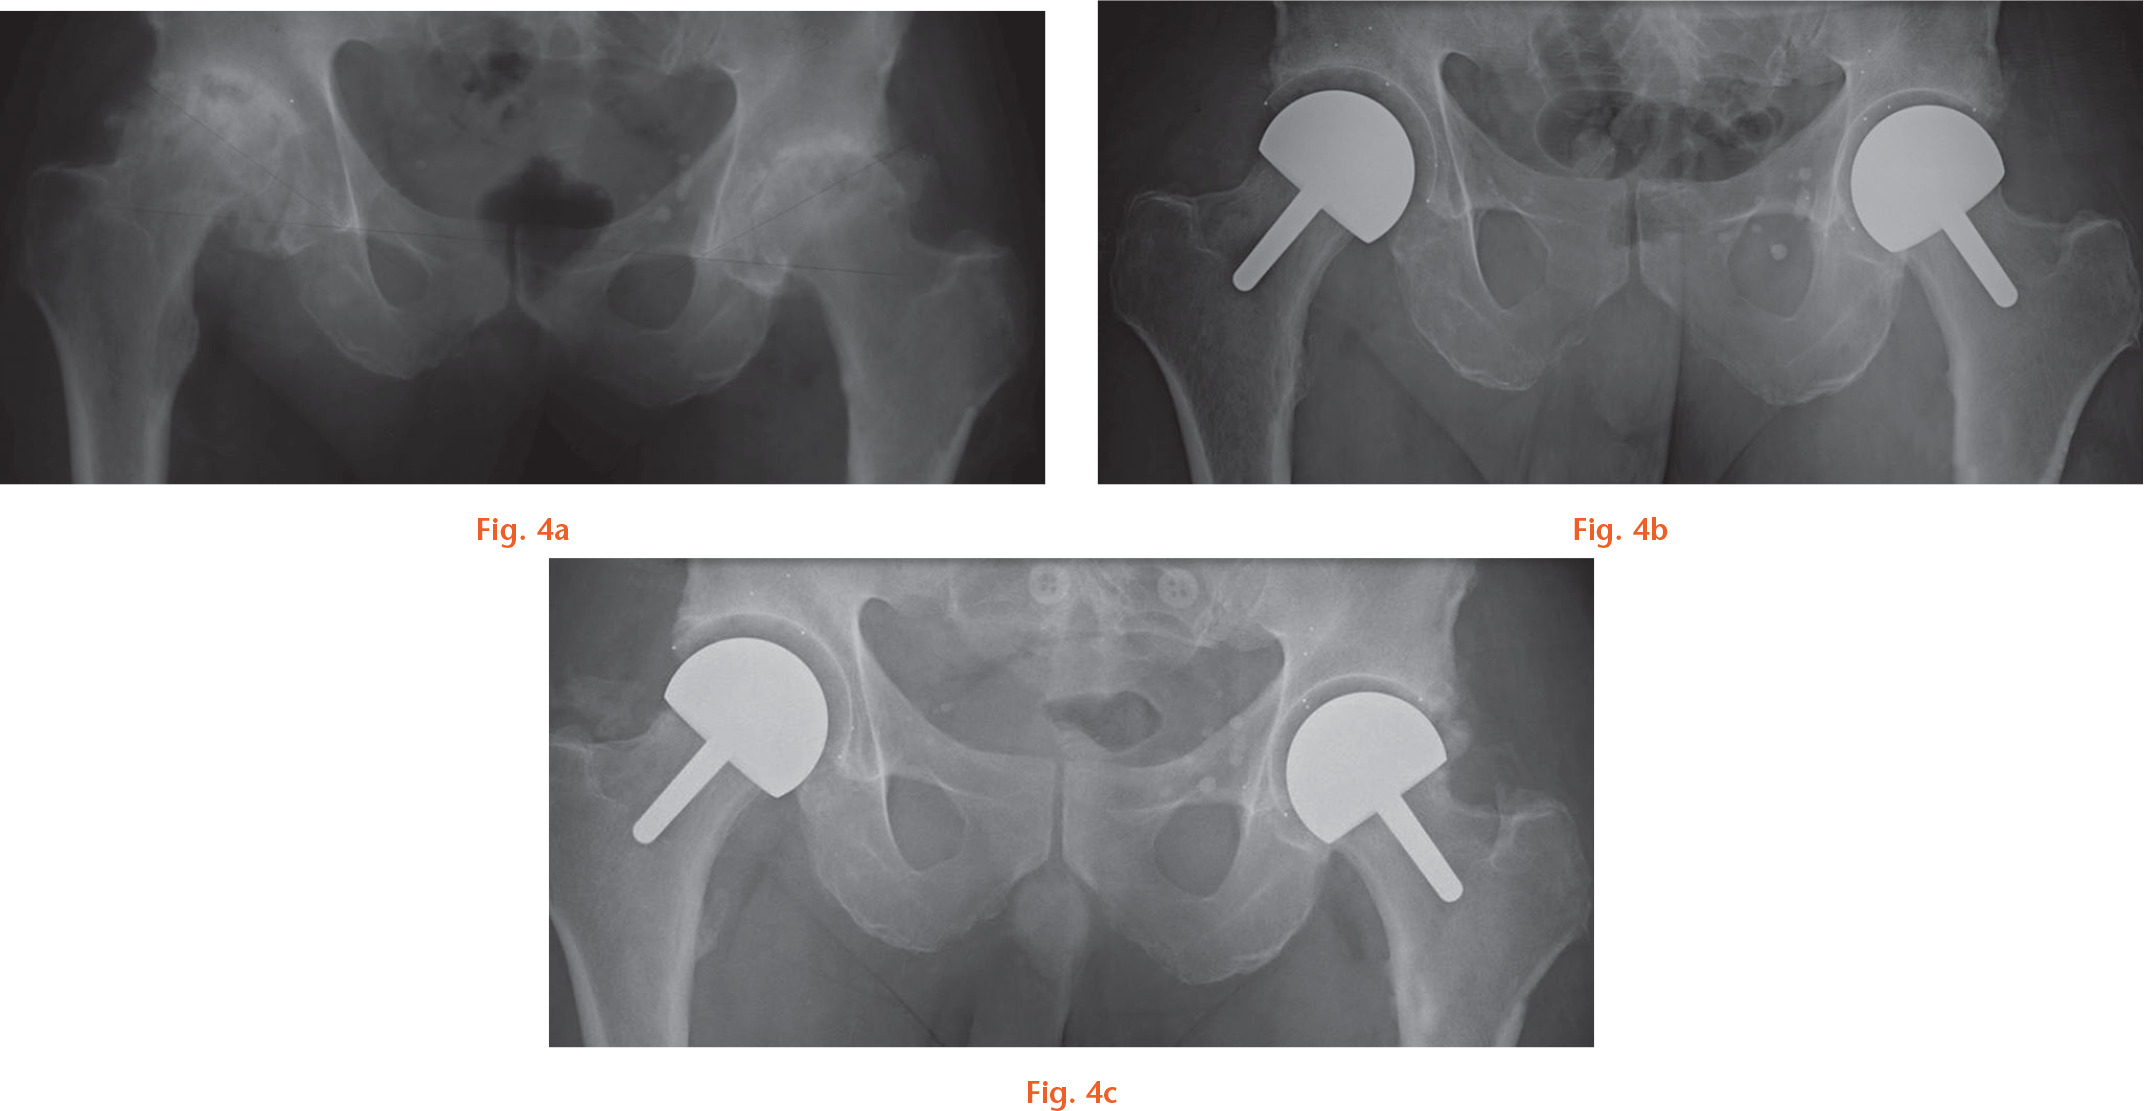 Fig. 4 
          Radiological series of a 59-year-old male surgeon with an active lifestyle, including rowing, spinning, and gymnastics: a) preoperatively; b) at two months; and c) at one year. He presented with bilateral painful arthritic hips. He refused metal-on-metal hip resurfacing arthroplasty and total hip arthroplasty, and specifically requested a metal-on-crosslinked-polyethylene. Superolateral erosion creating secondary dysplasia required the use of a 10 mm inner diameter–outer diameter difference component on the right side. The more commonly used 6 mm sufficed on the left. At one year, he had returned to previous activity. A radiograph at one year showed grade I heterotopic ossification.
        